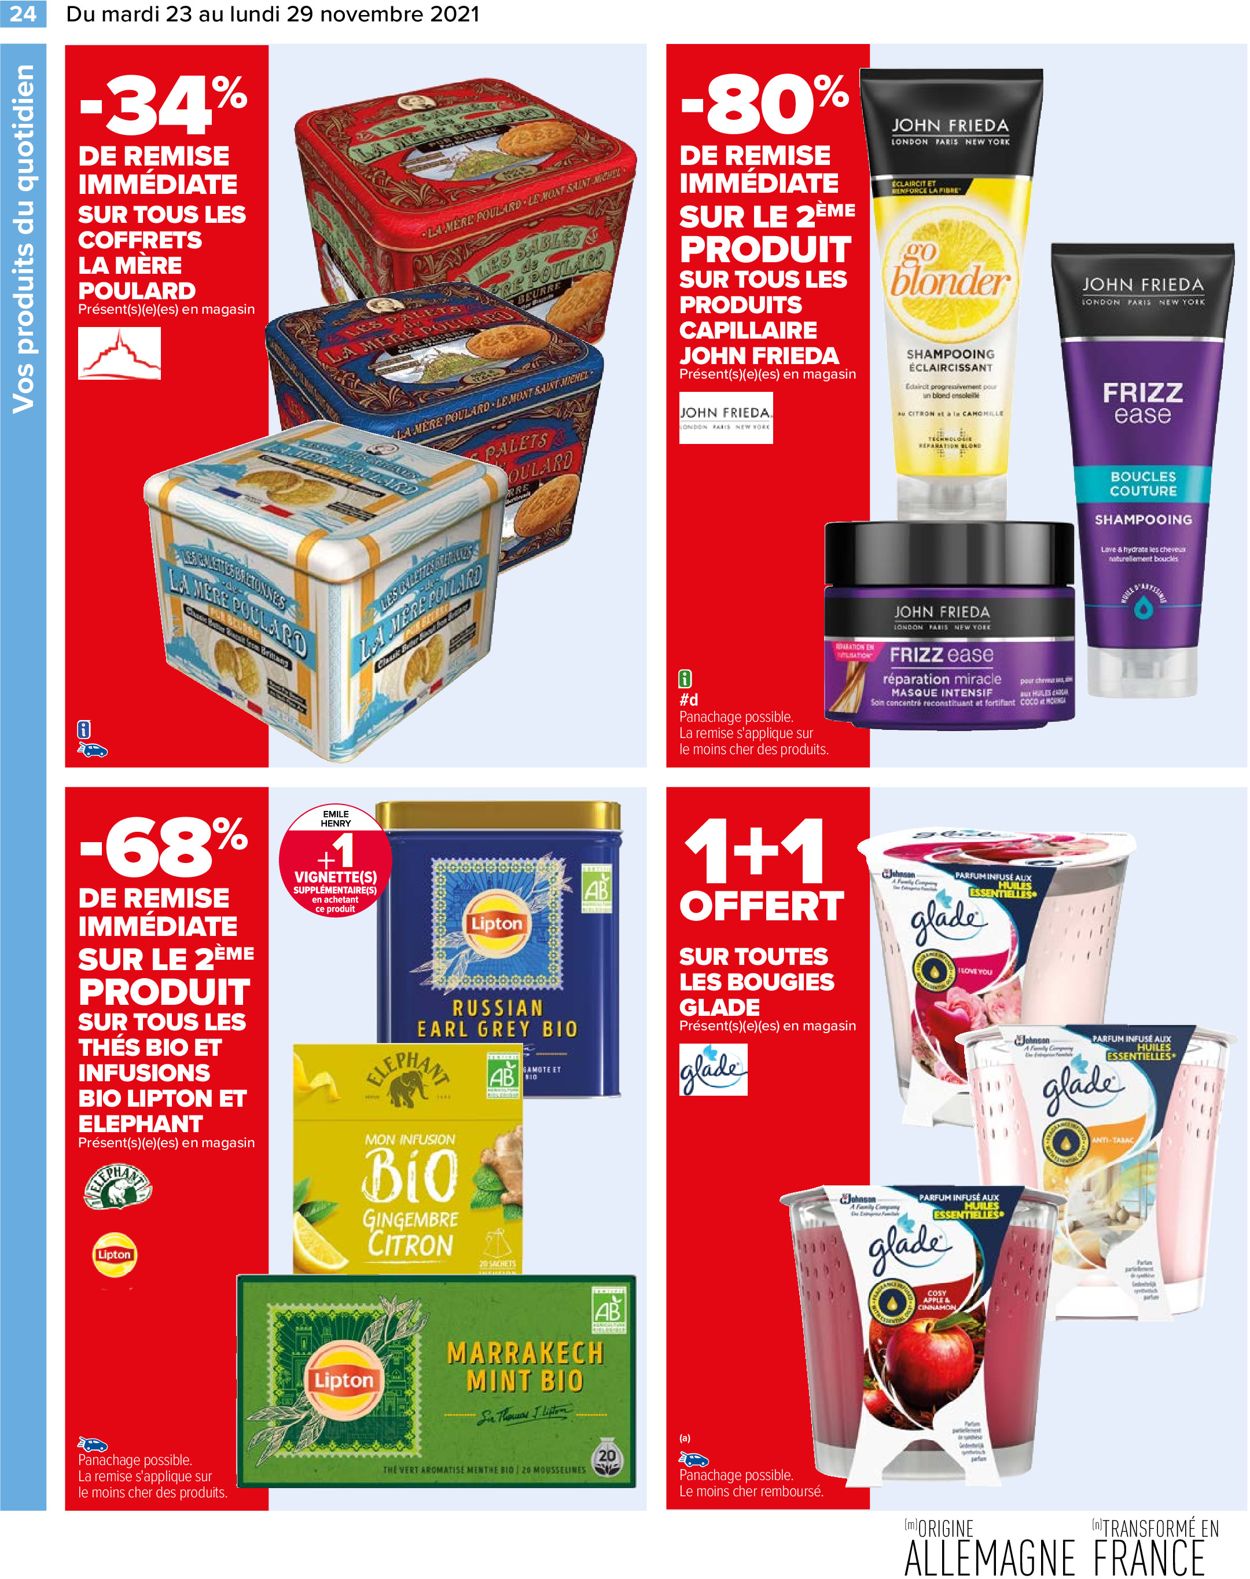 Carrefour BLACK WEEK 2021 Catalogue - 23.11-29.11.2021 (Page 24)